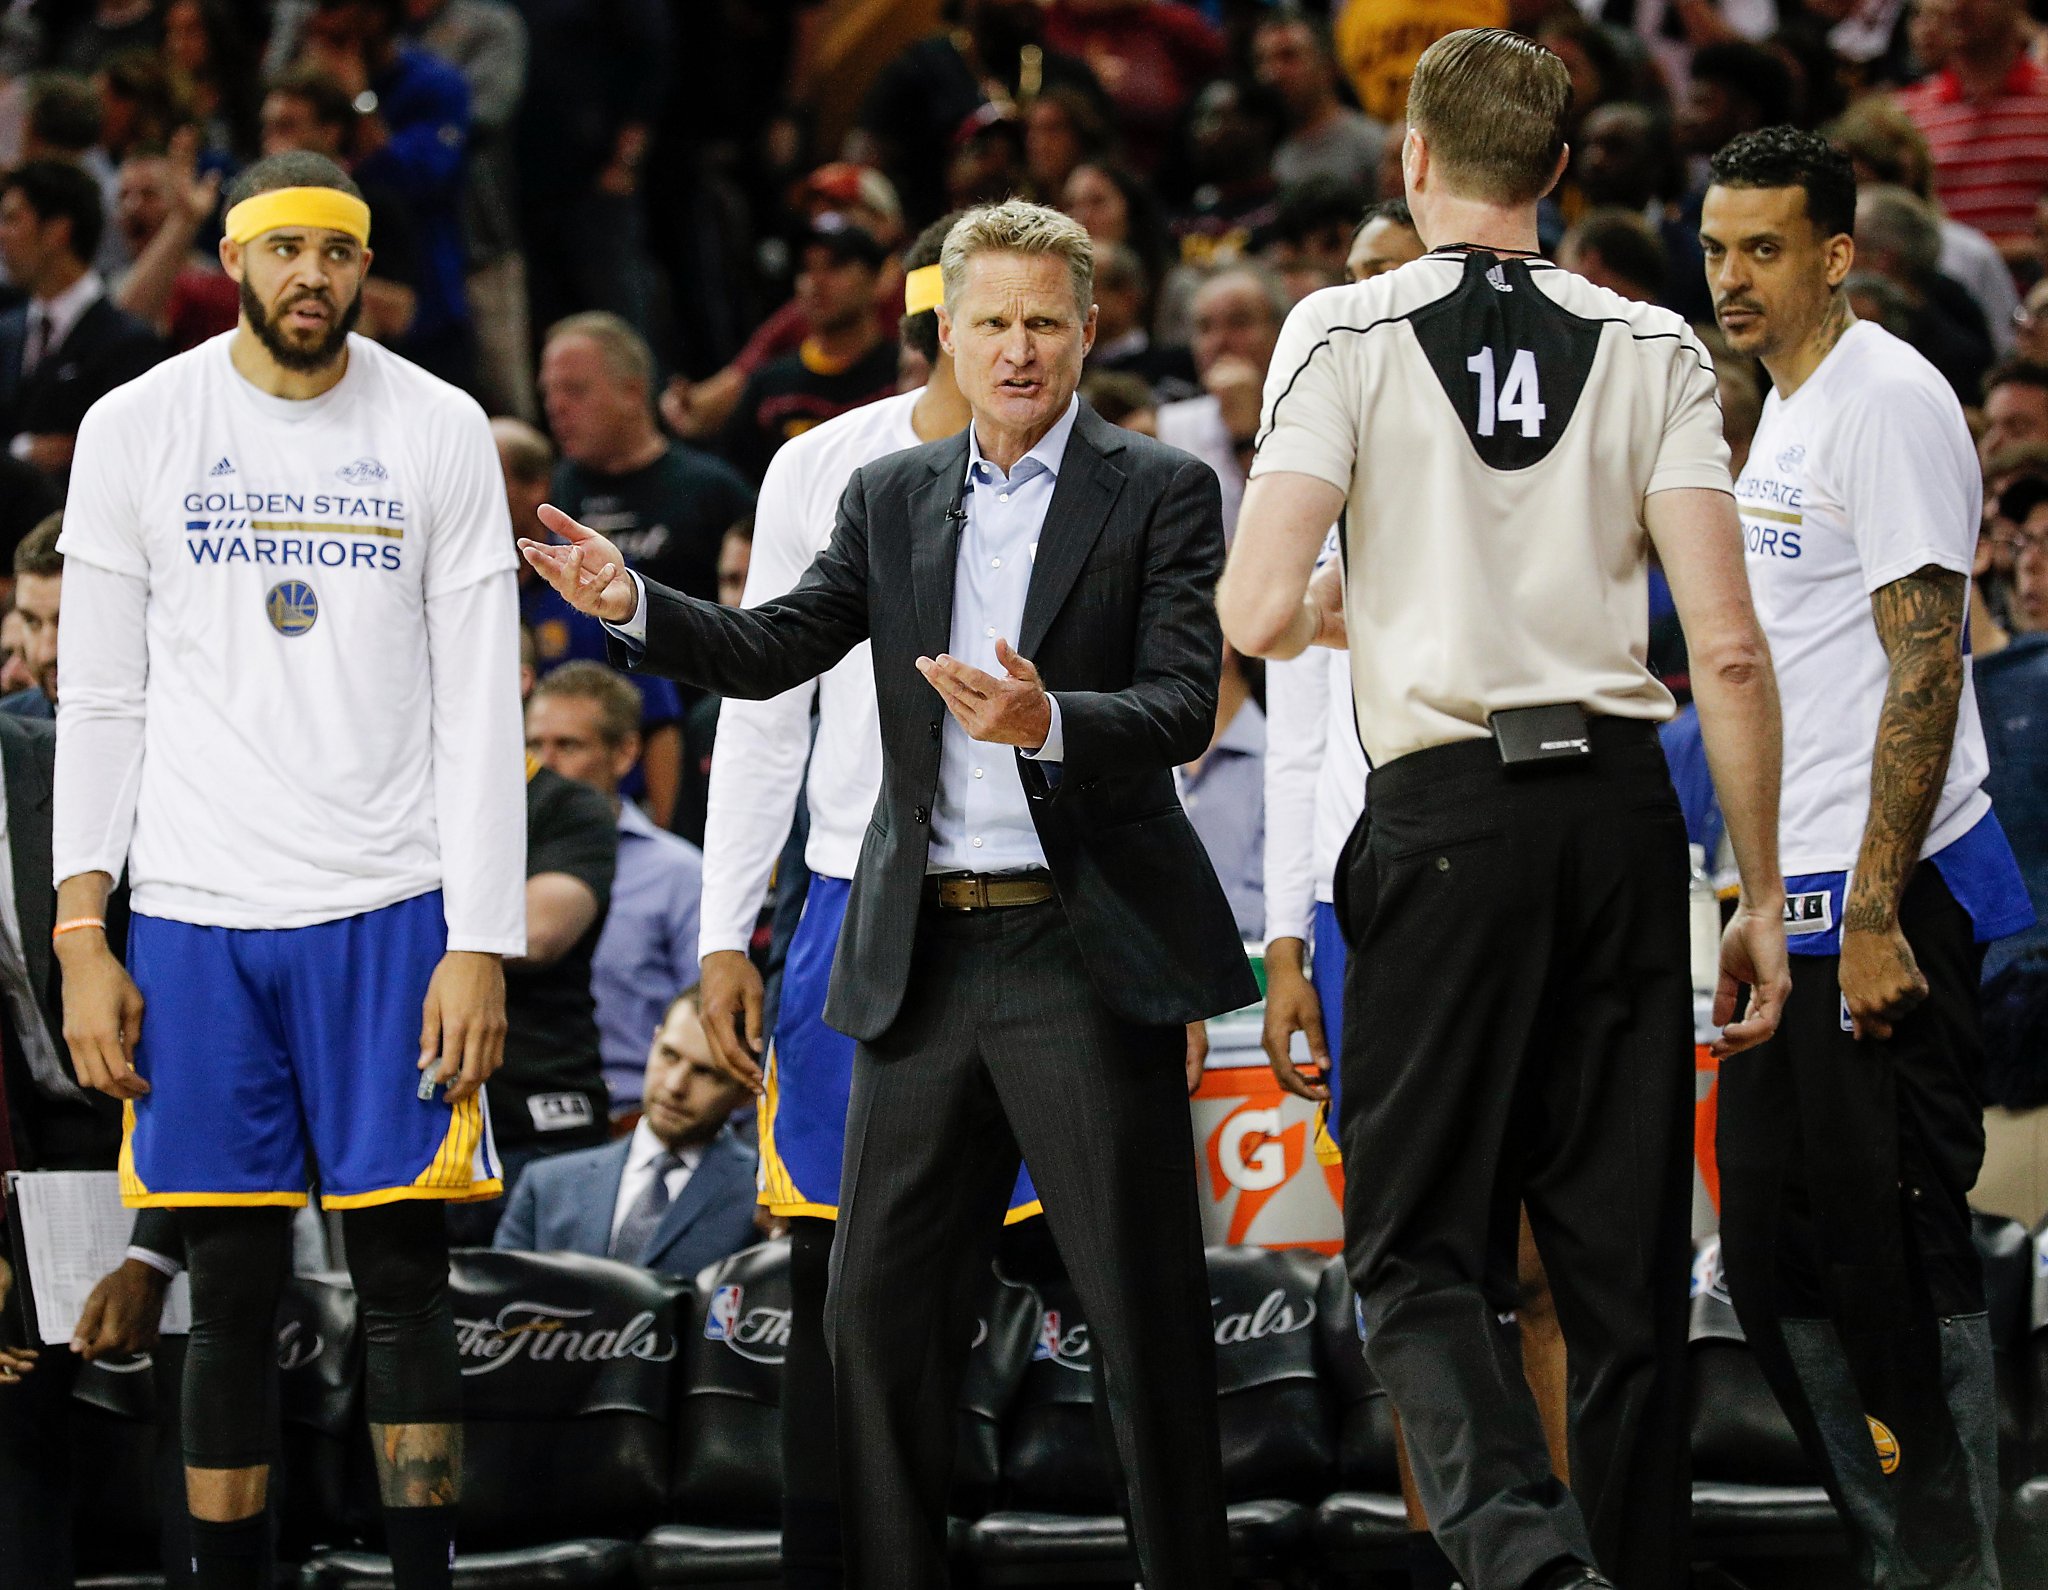 Warriors meet with officials to discuss rules, other topics